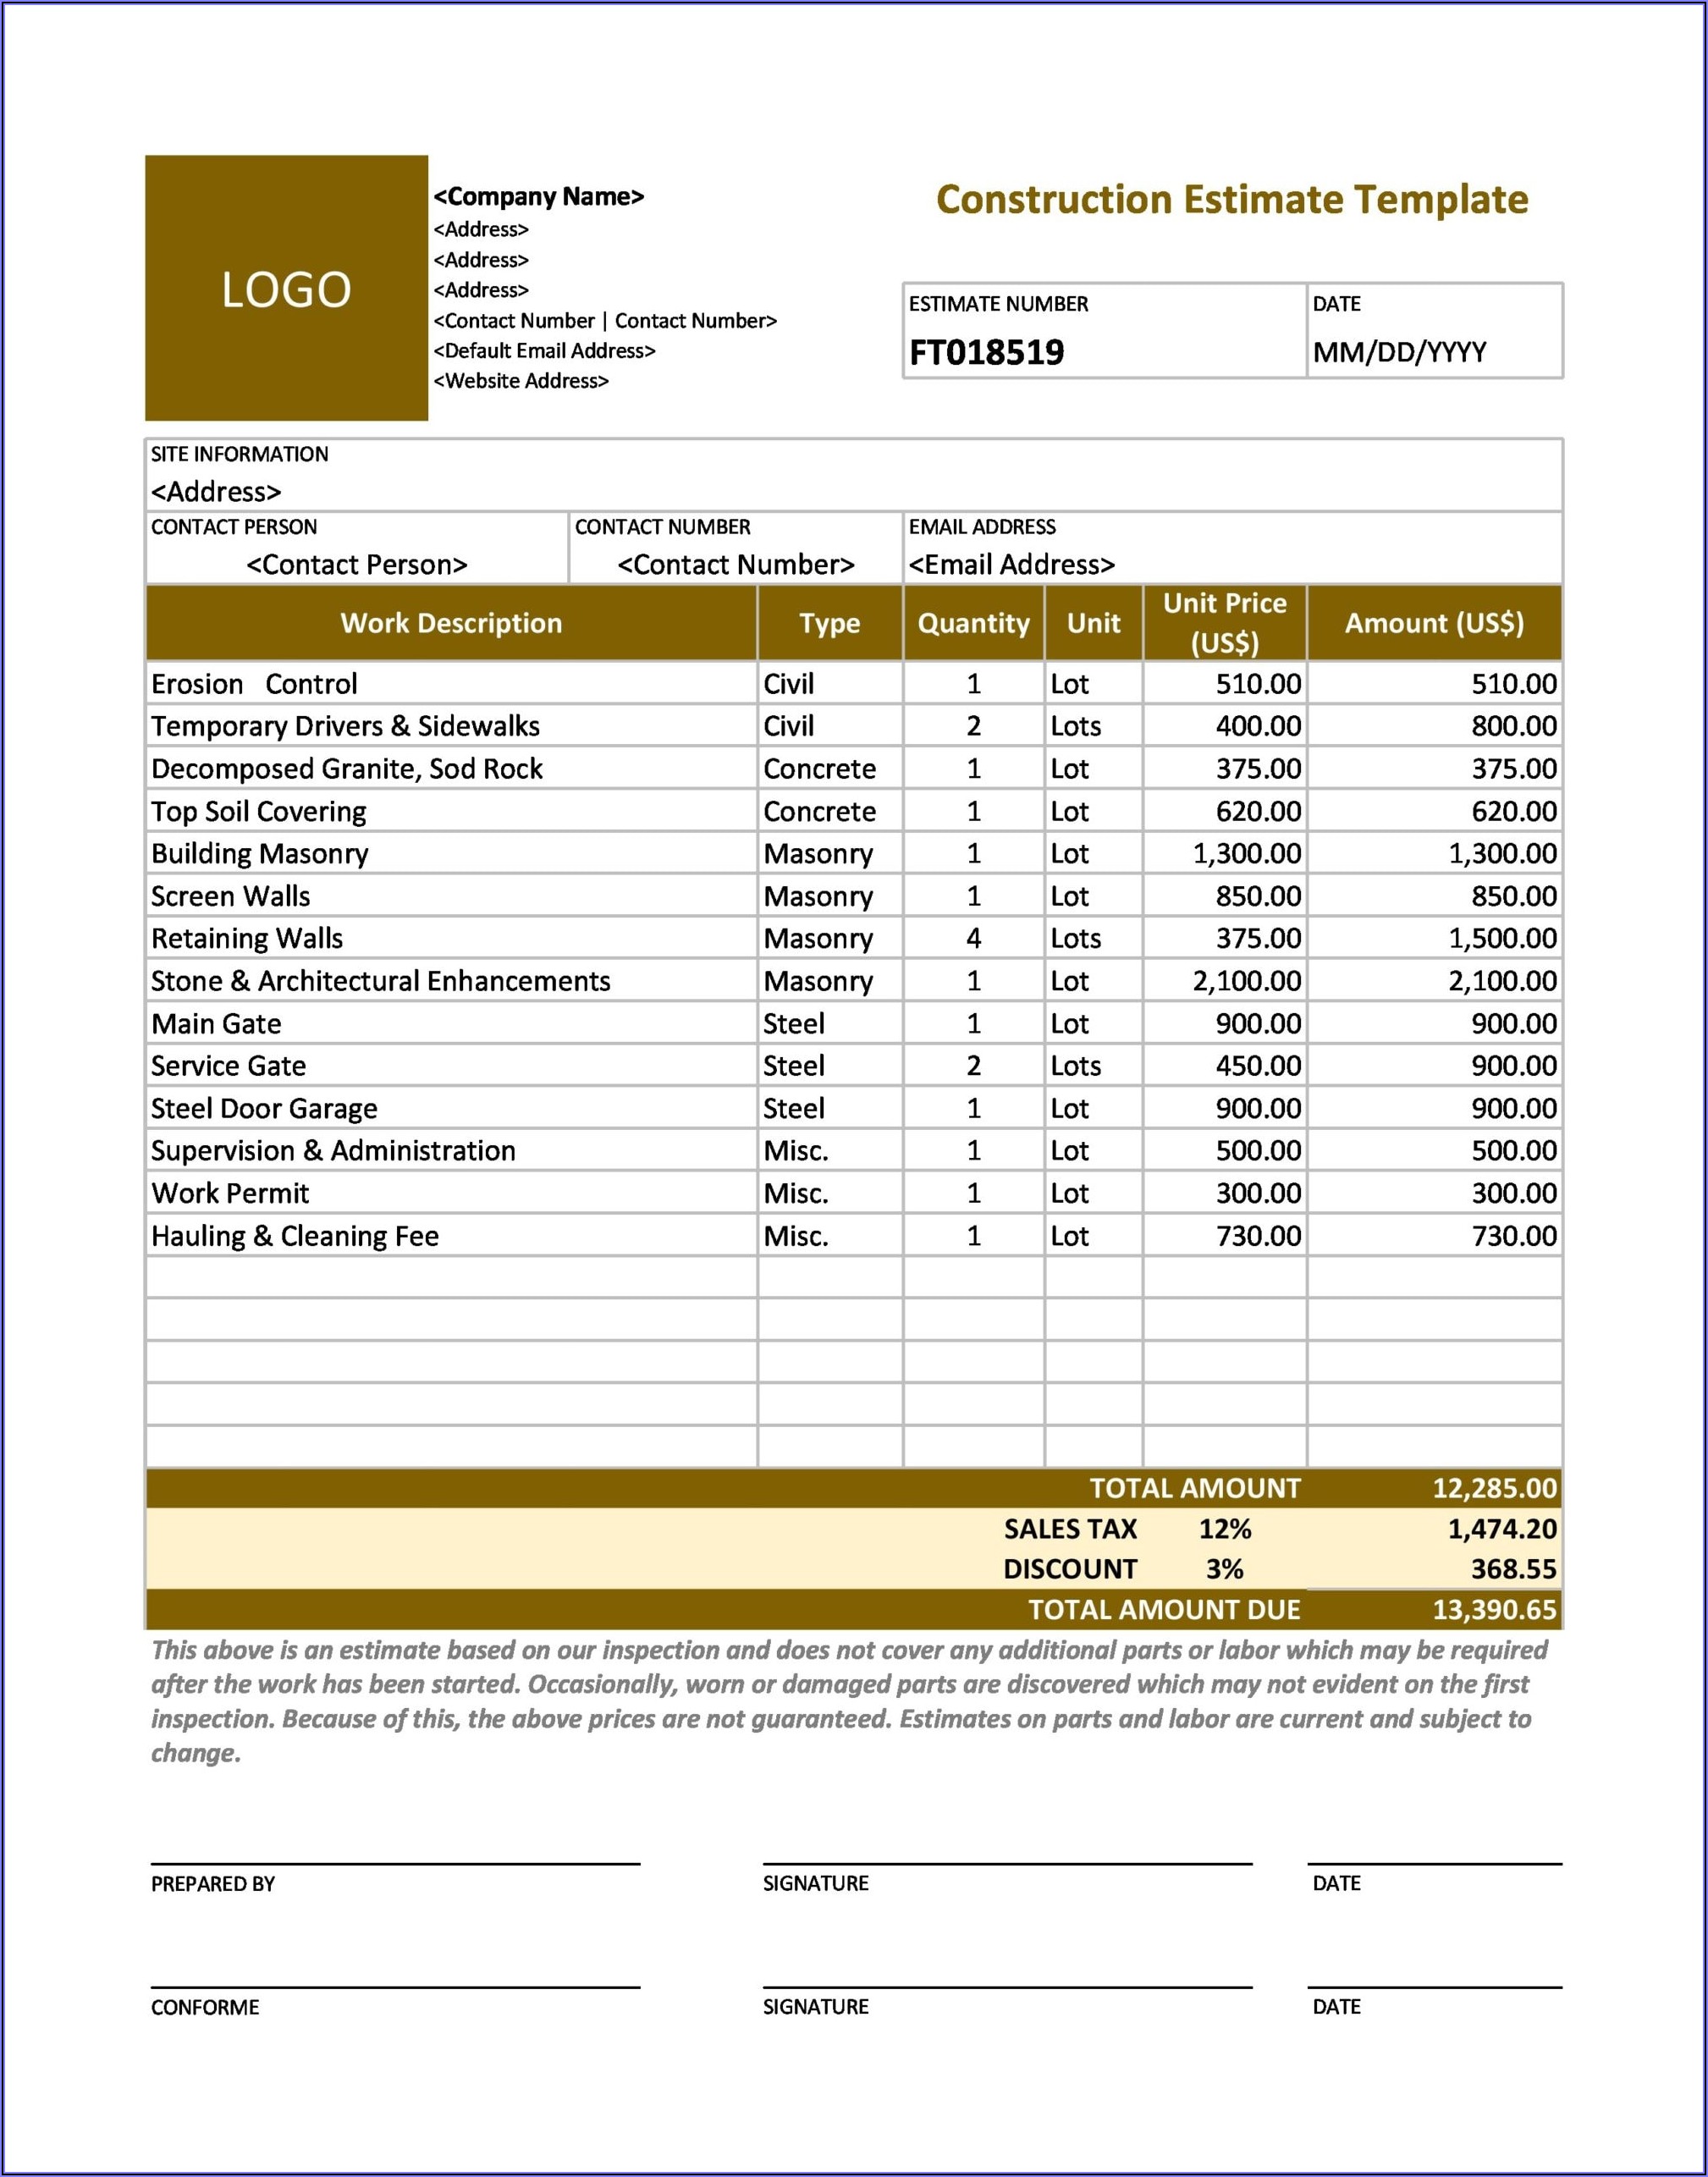 Construction Price Sheet Template